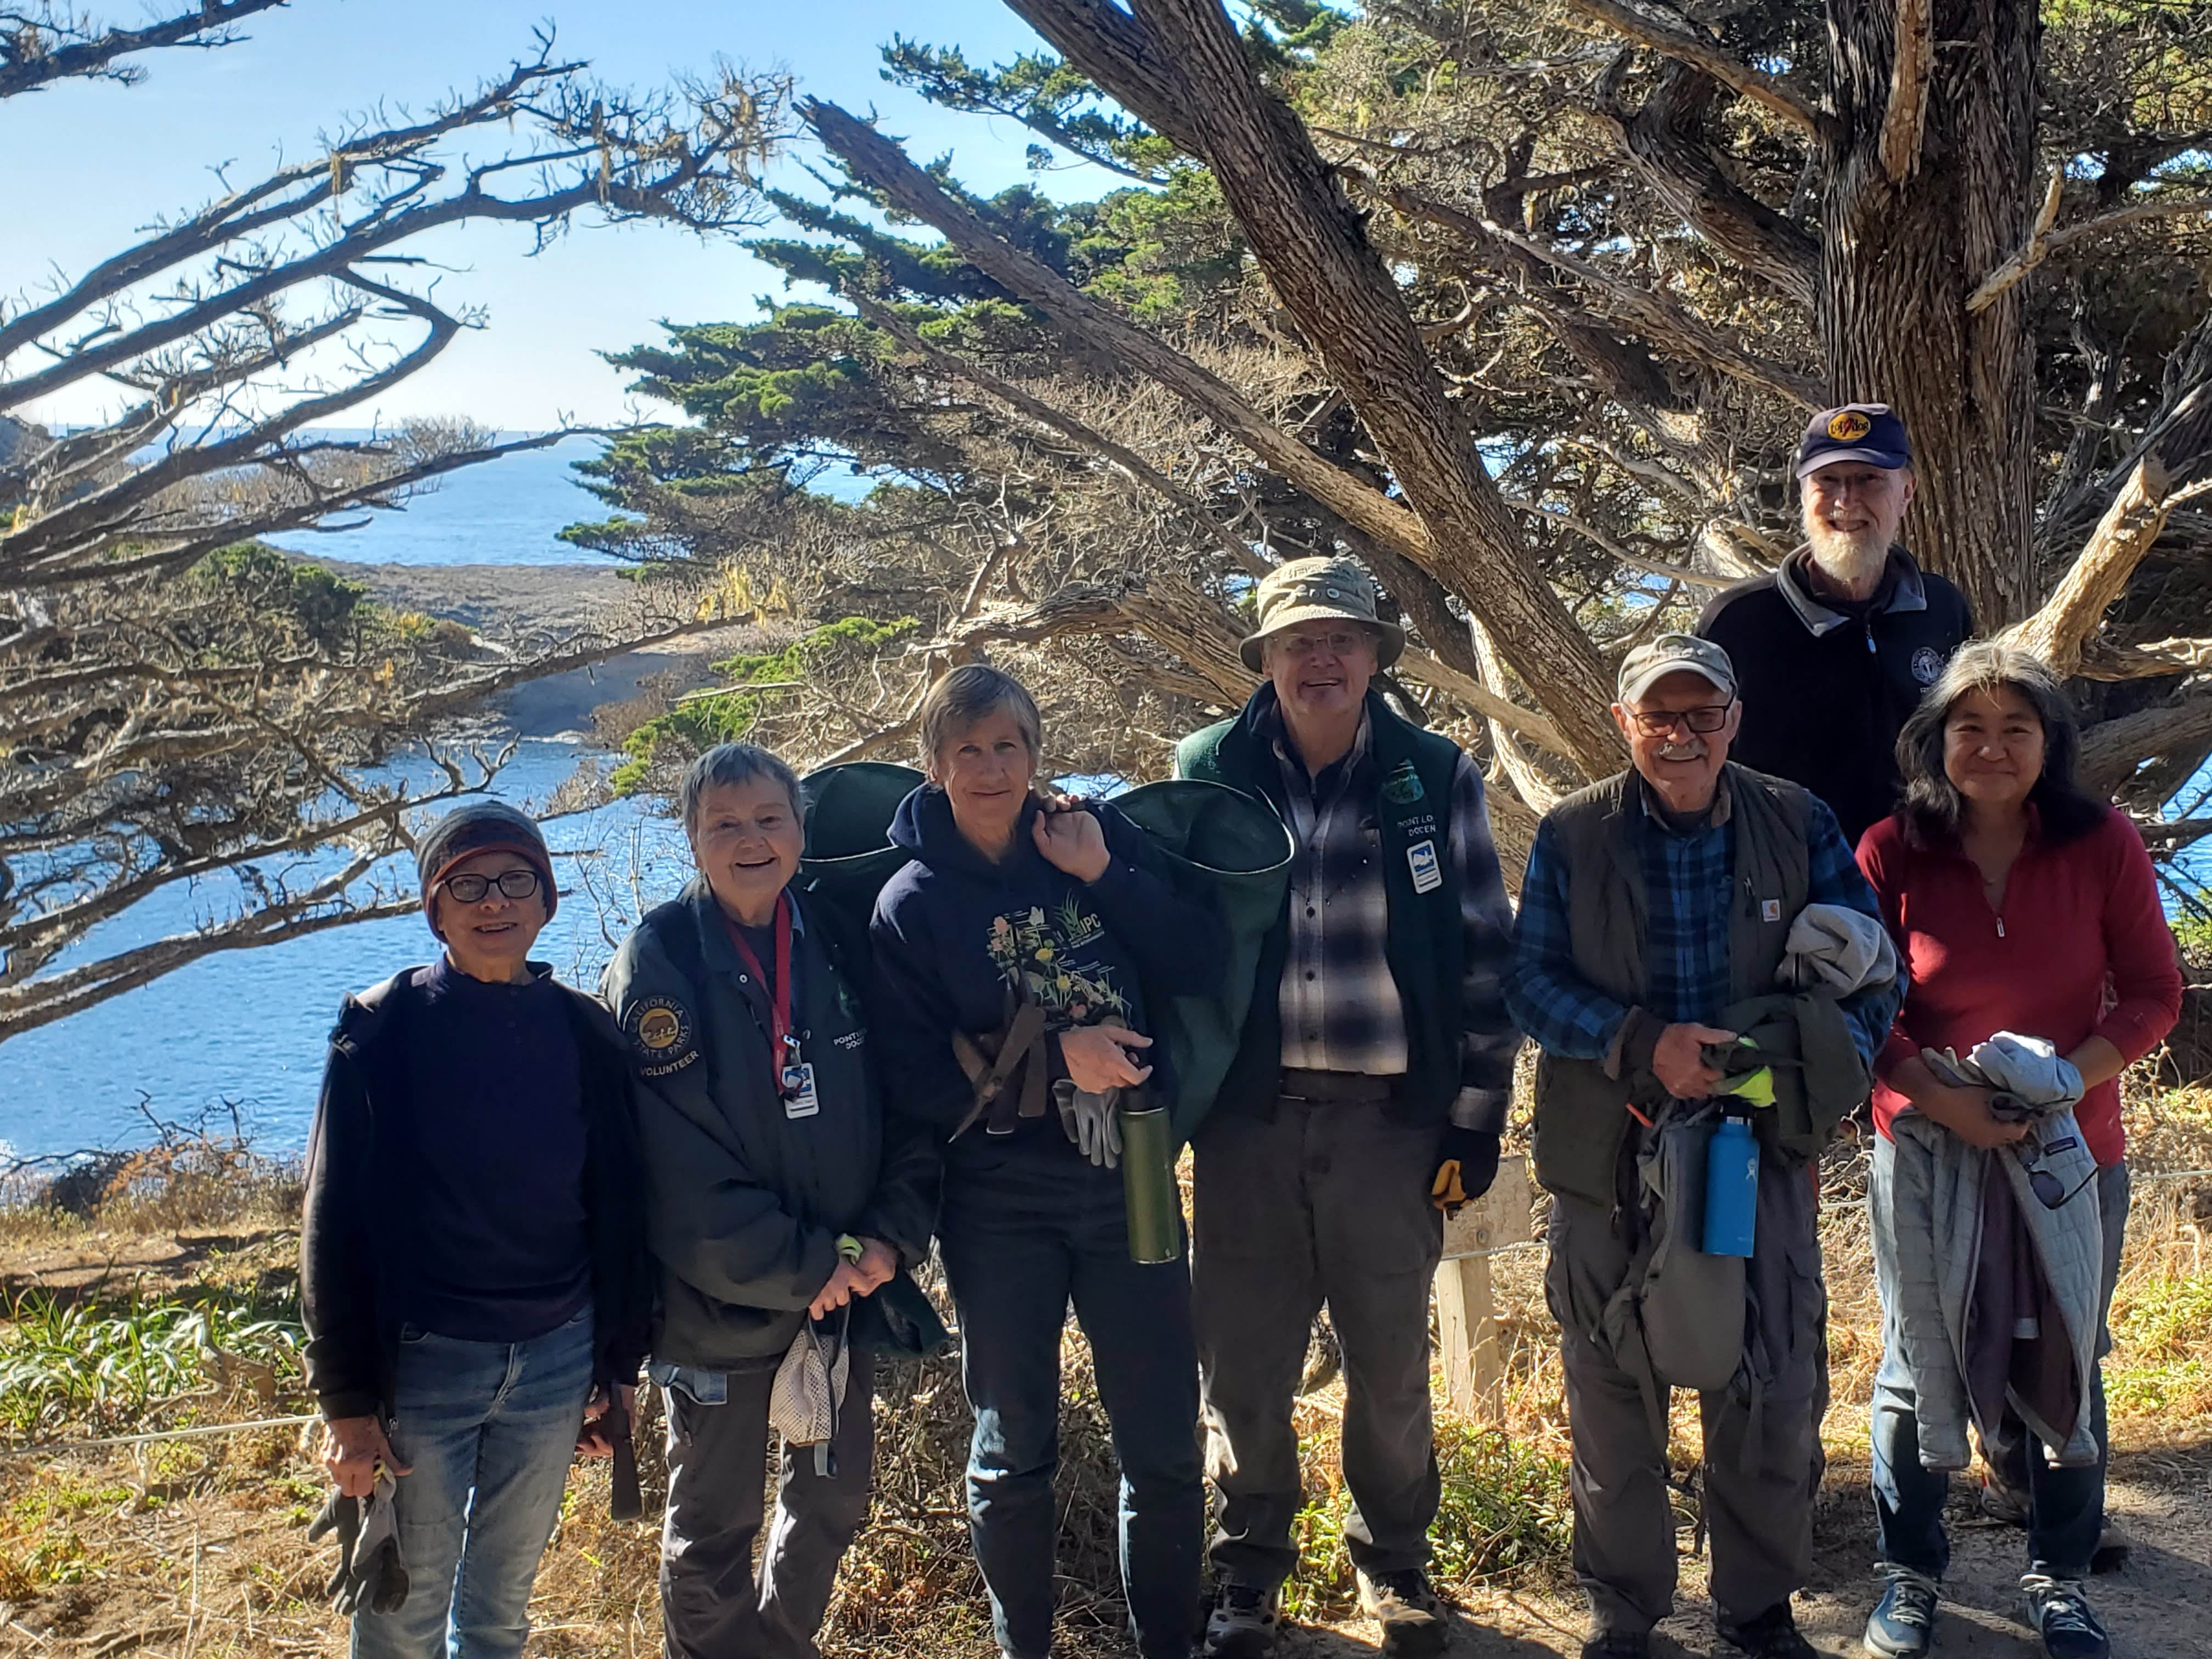 Volunteers pose after a morning of remove invasive grasses from the Cypress Grove at Point Lobos SNR.